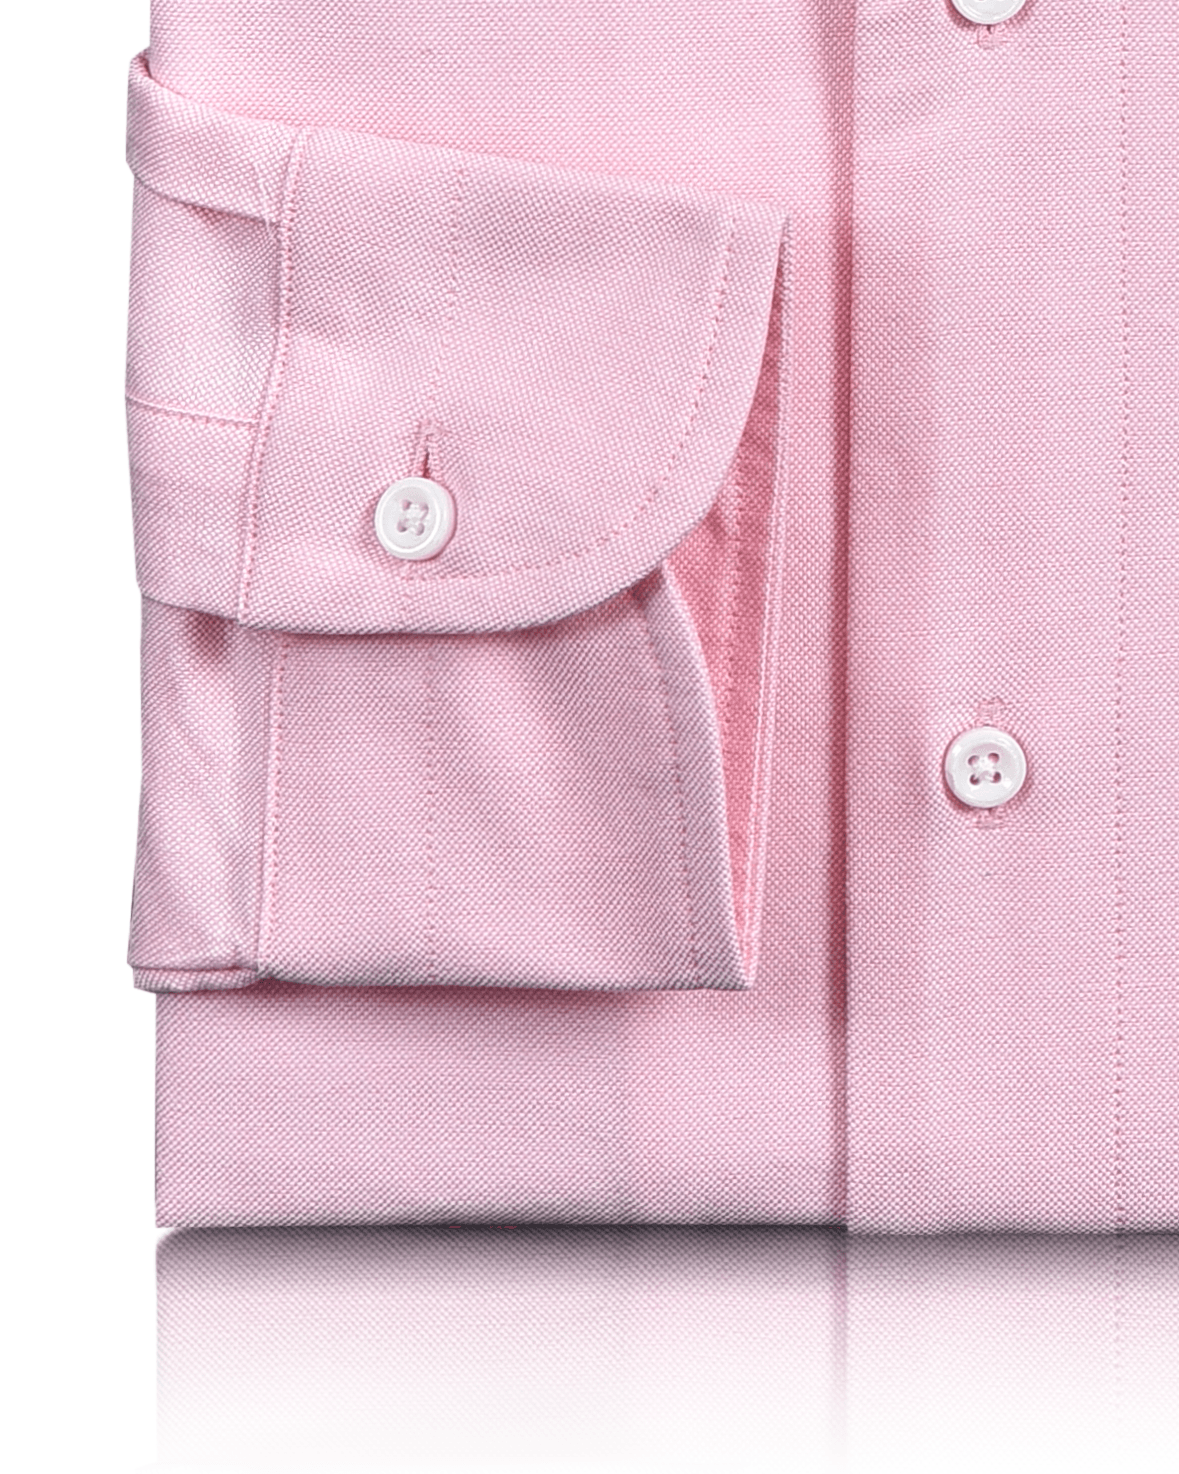 Cuff of the custom oxford shirt for men by Luxire in pink